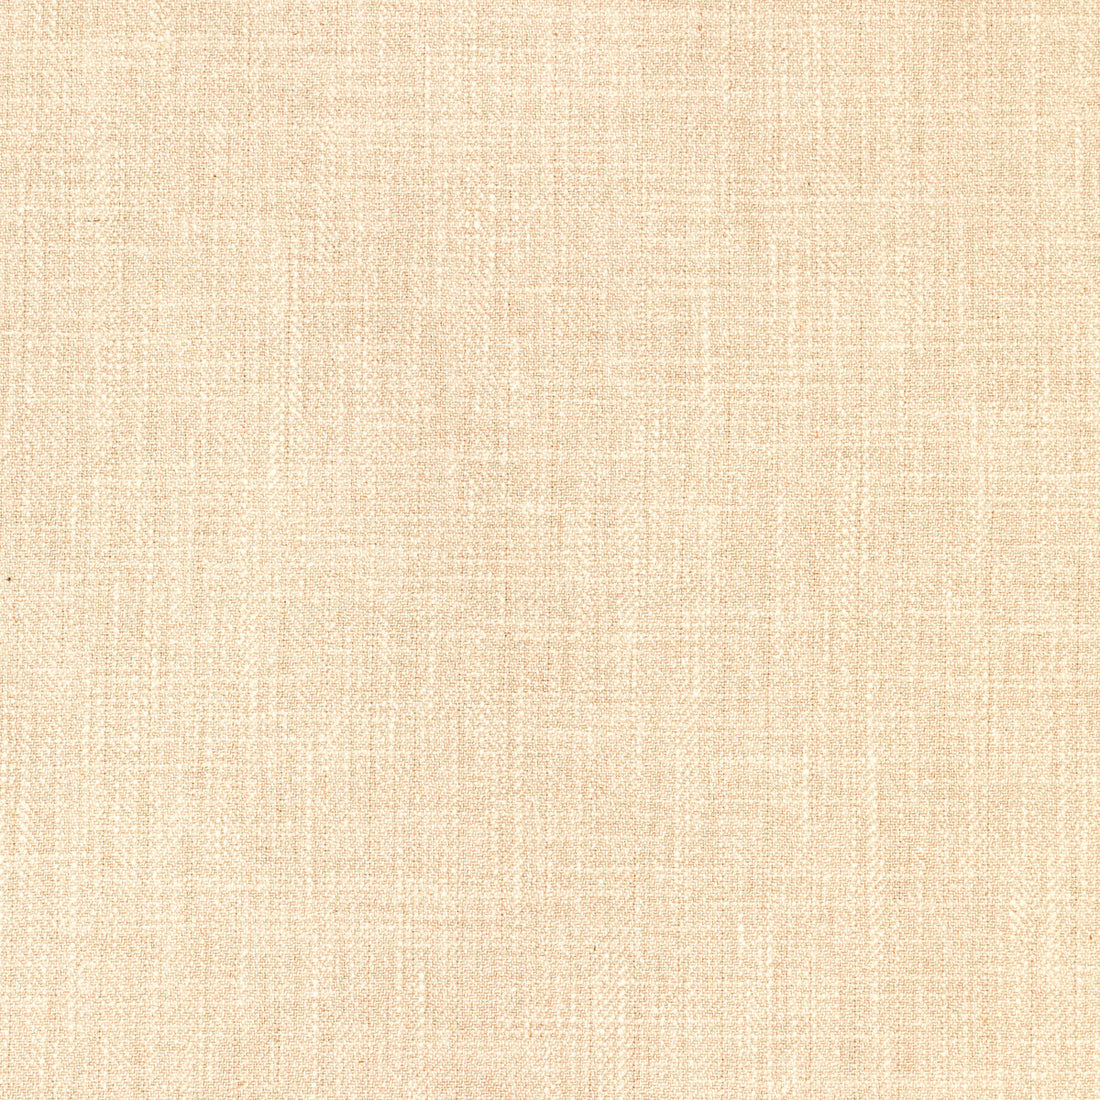 Kravet Basics fabric in 33842-161 color - pattern 33842.161.0 - by Kravet Basics in the Perfect Plains collection